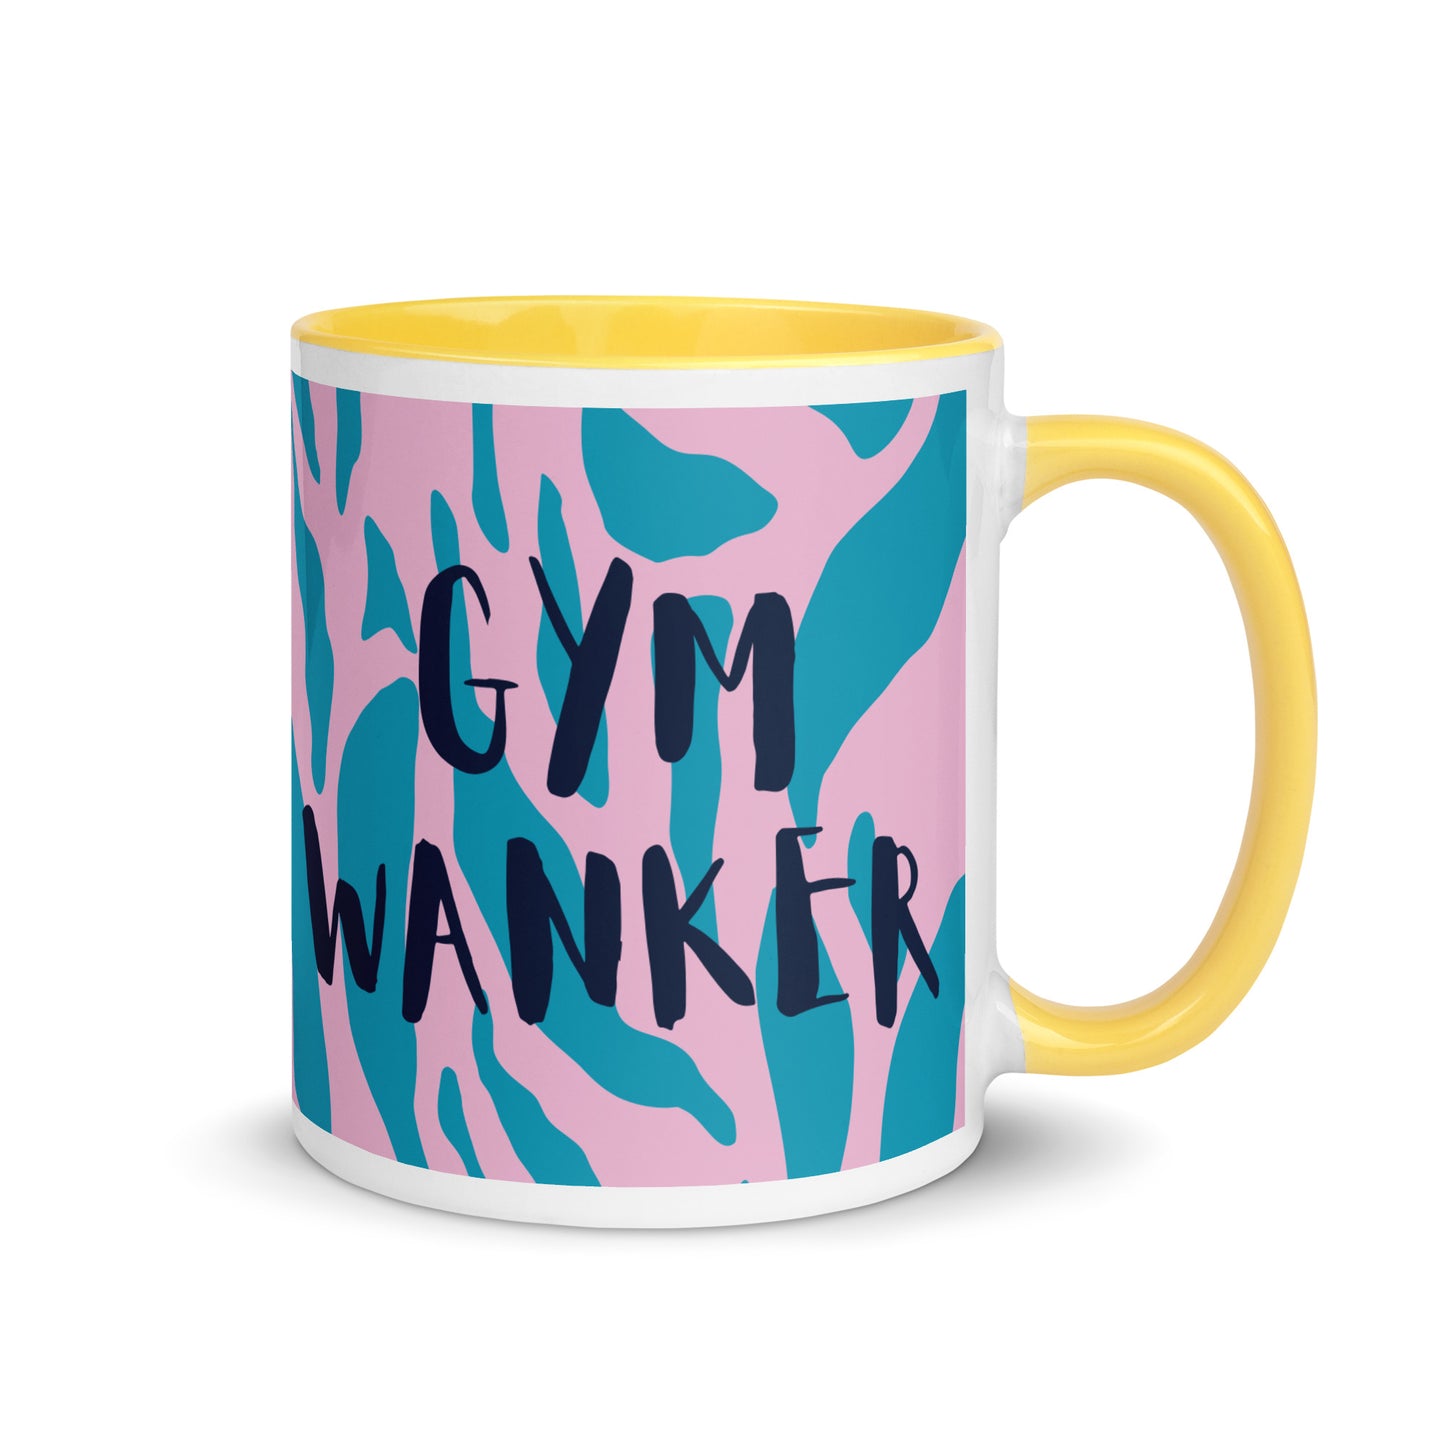 yellow handled mug with gym wanker written across a blue and pink animal print background. a gift for people who love the gym